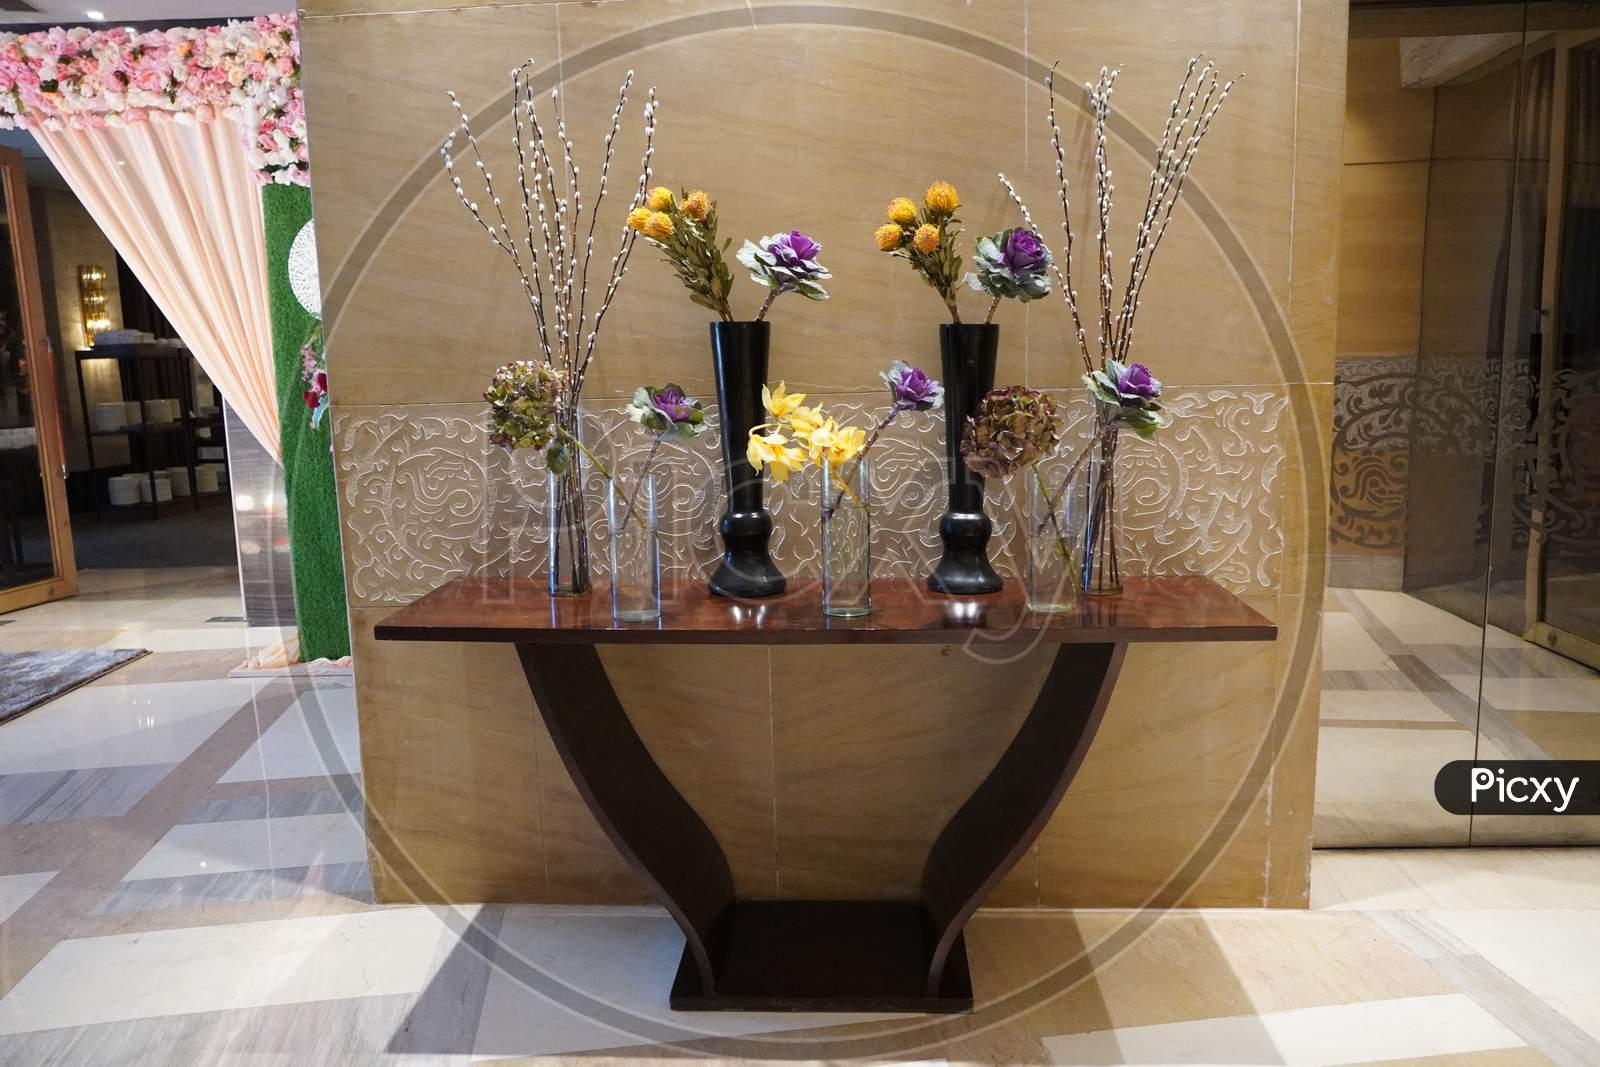 Black And Glass Vases With Flowers Inside Are Put On The Antique Table For Interior Decoration In A Hotel Lobby. They’Re Decorative Items For Vintage Classic Design In House, Hotel, Restaurant.